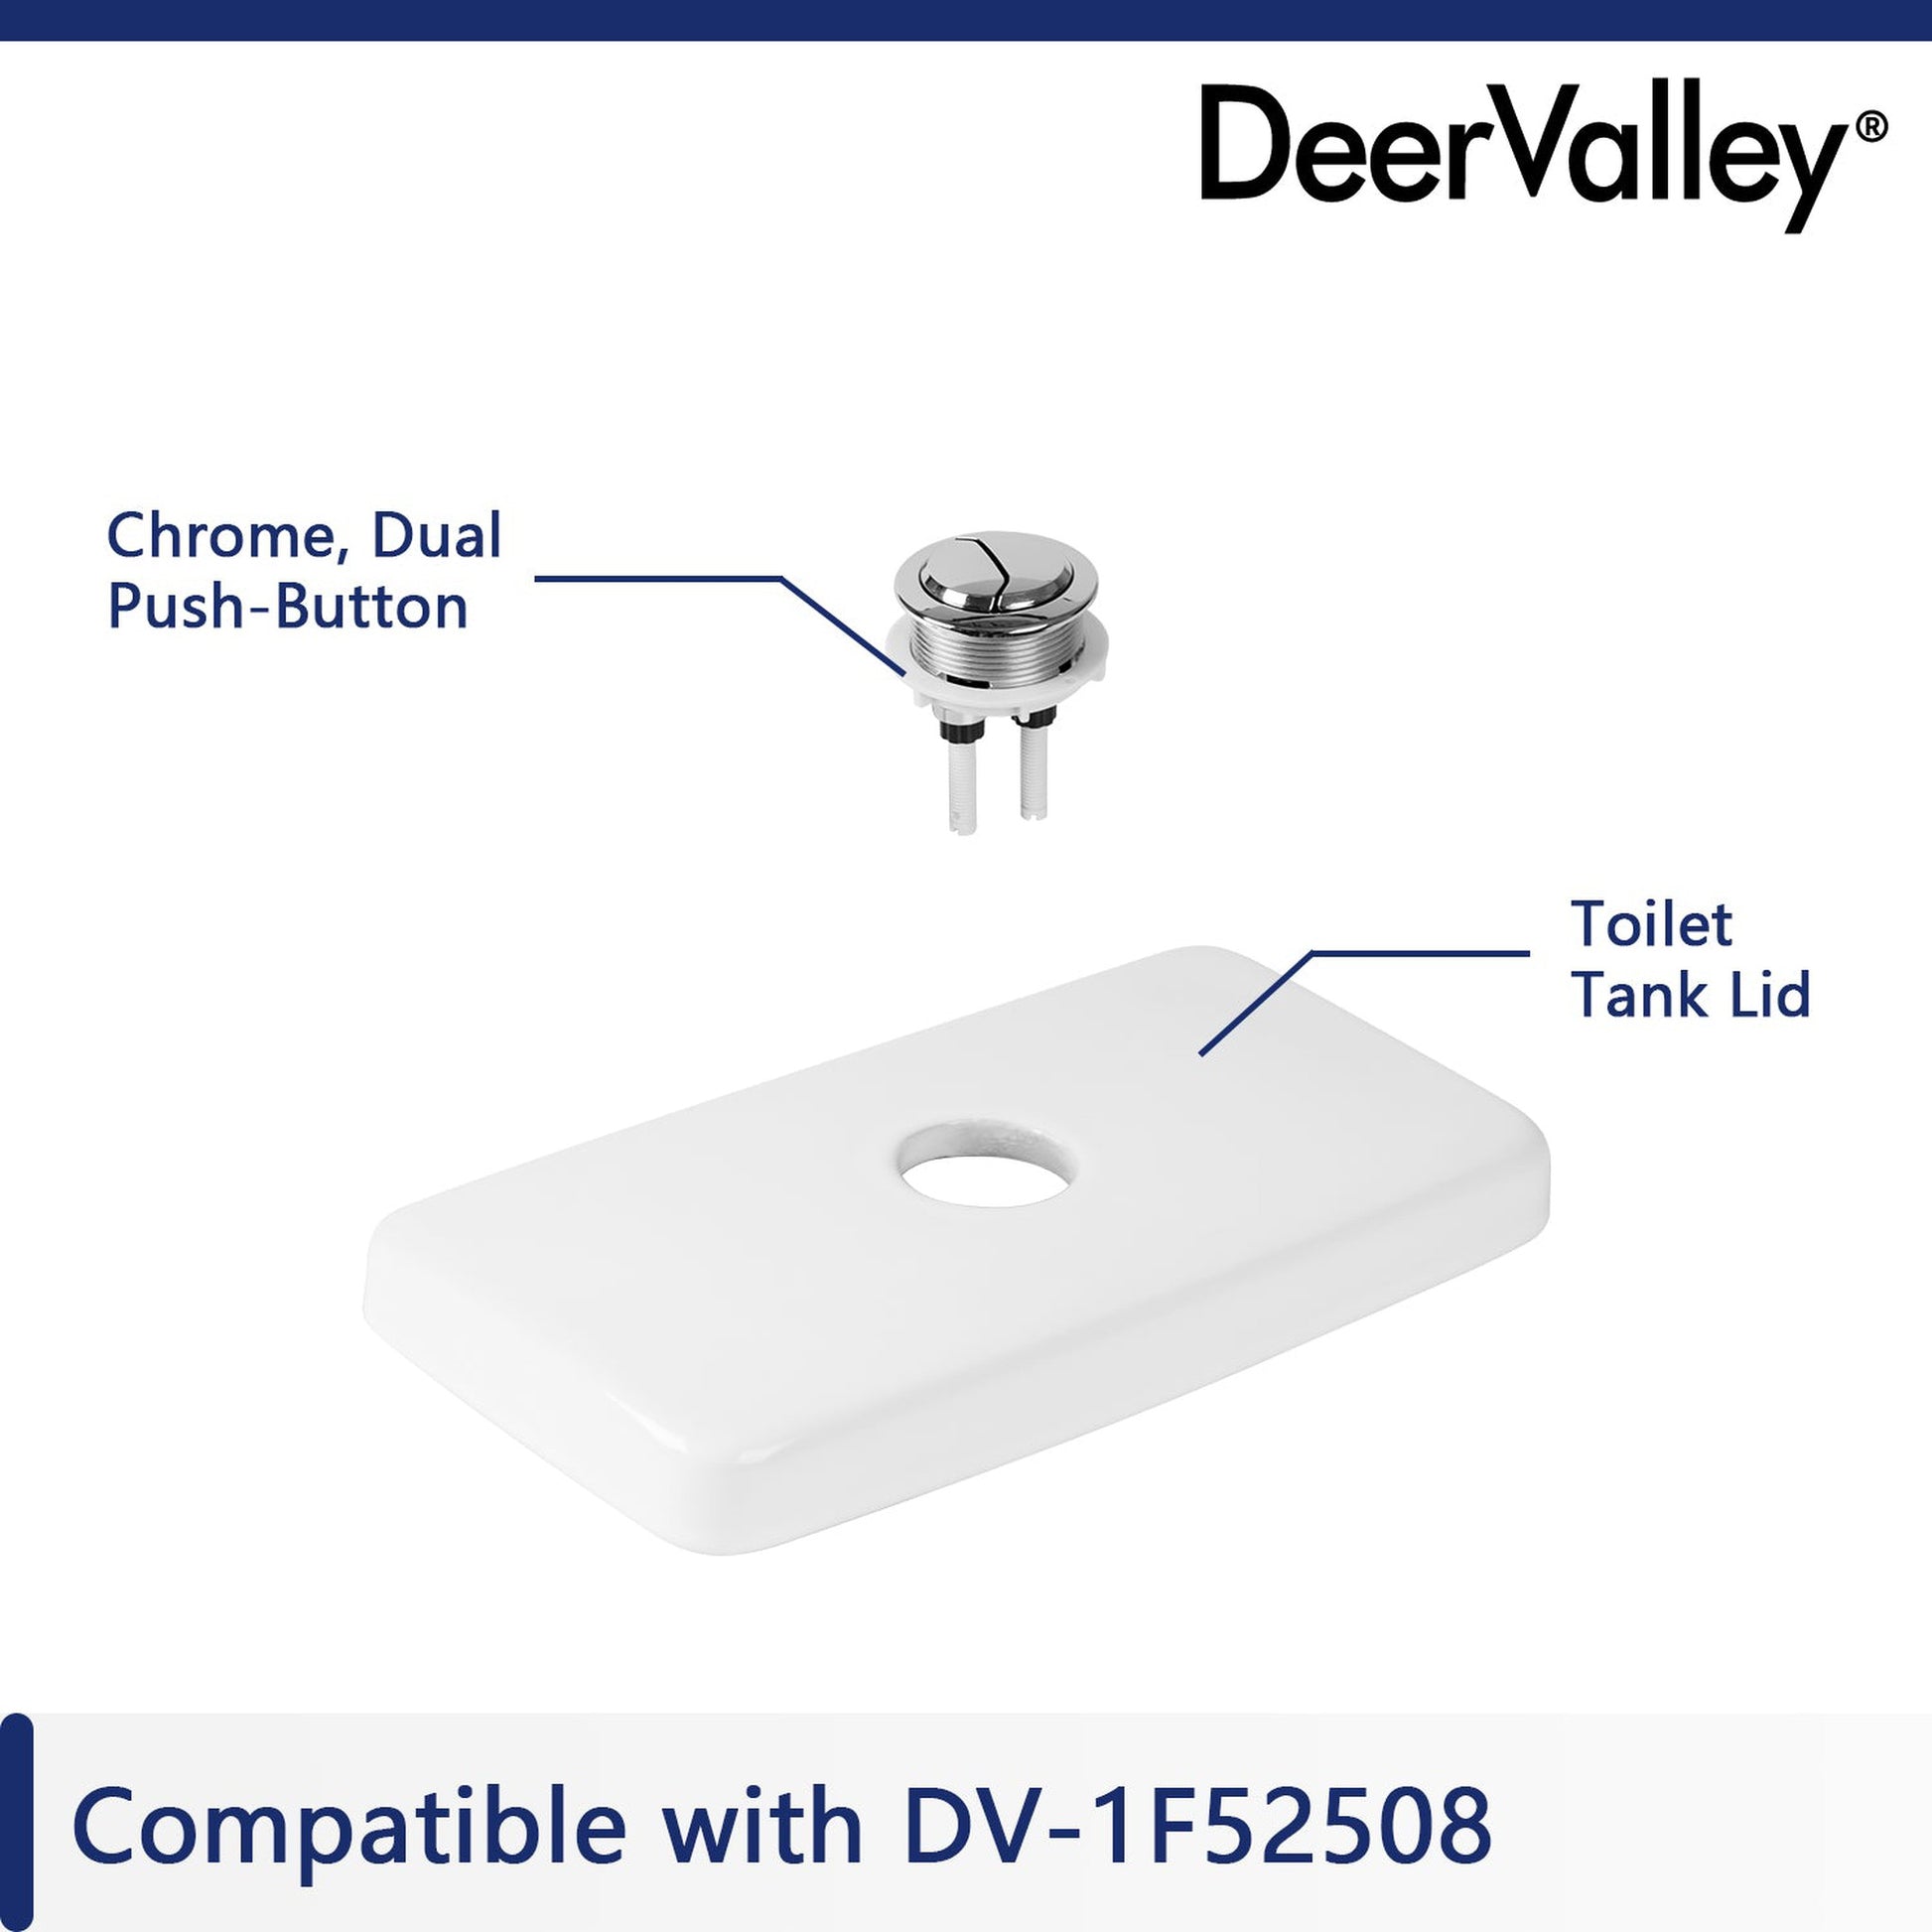 DeerValley Tank Lid (Not with a flush button, compatible with DV-1F52508)